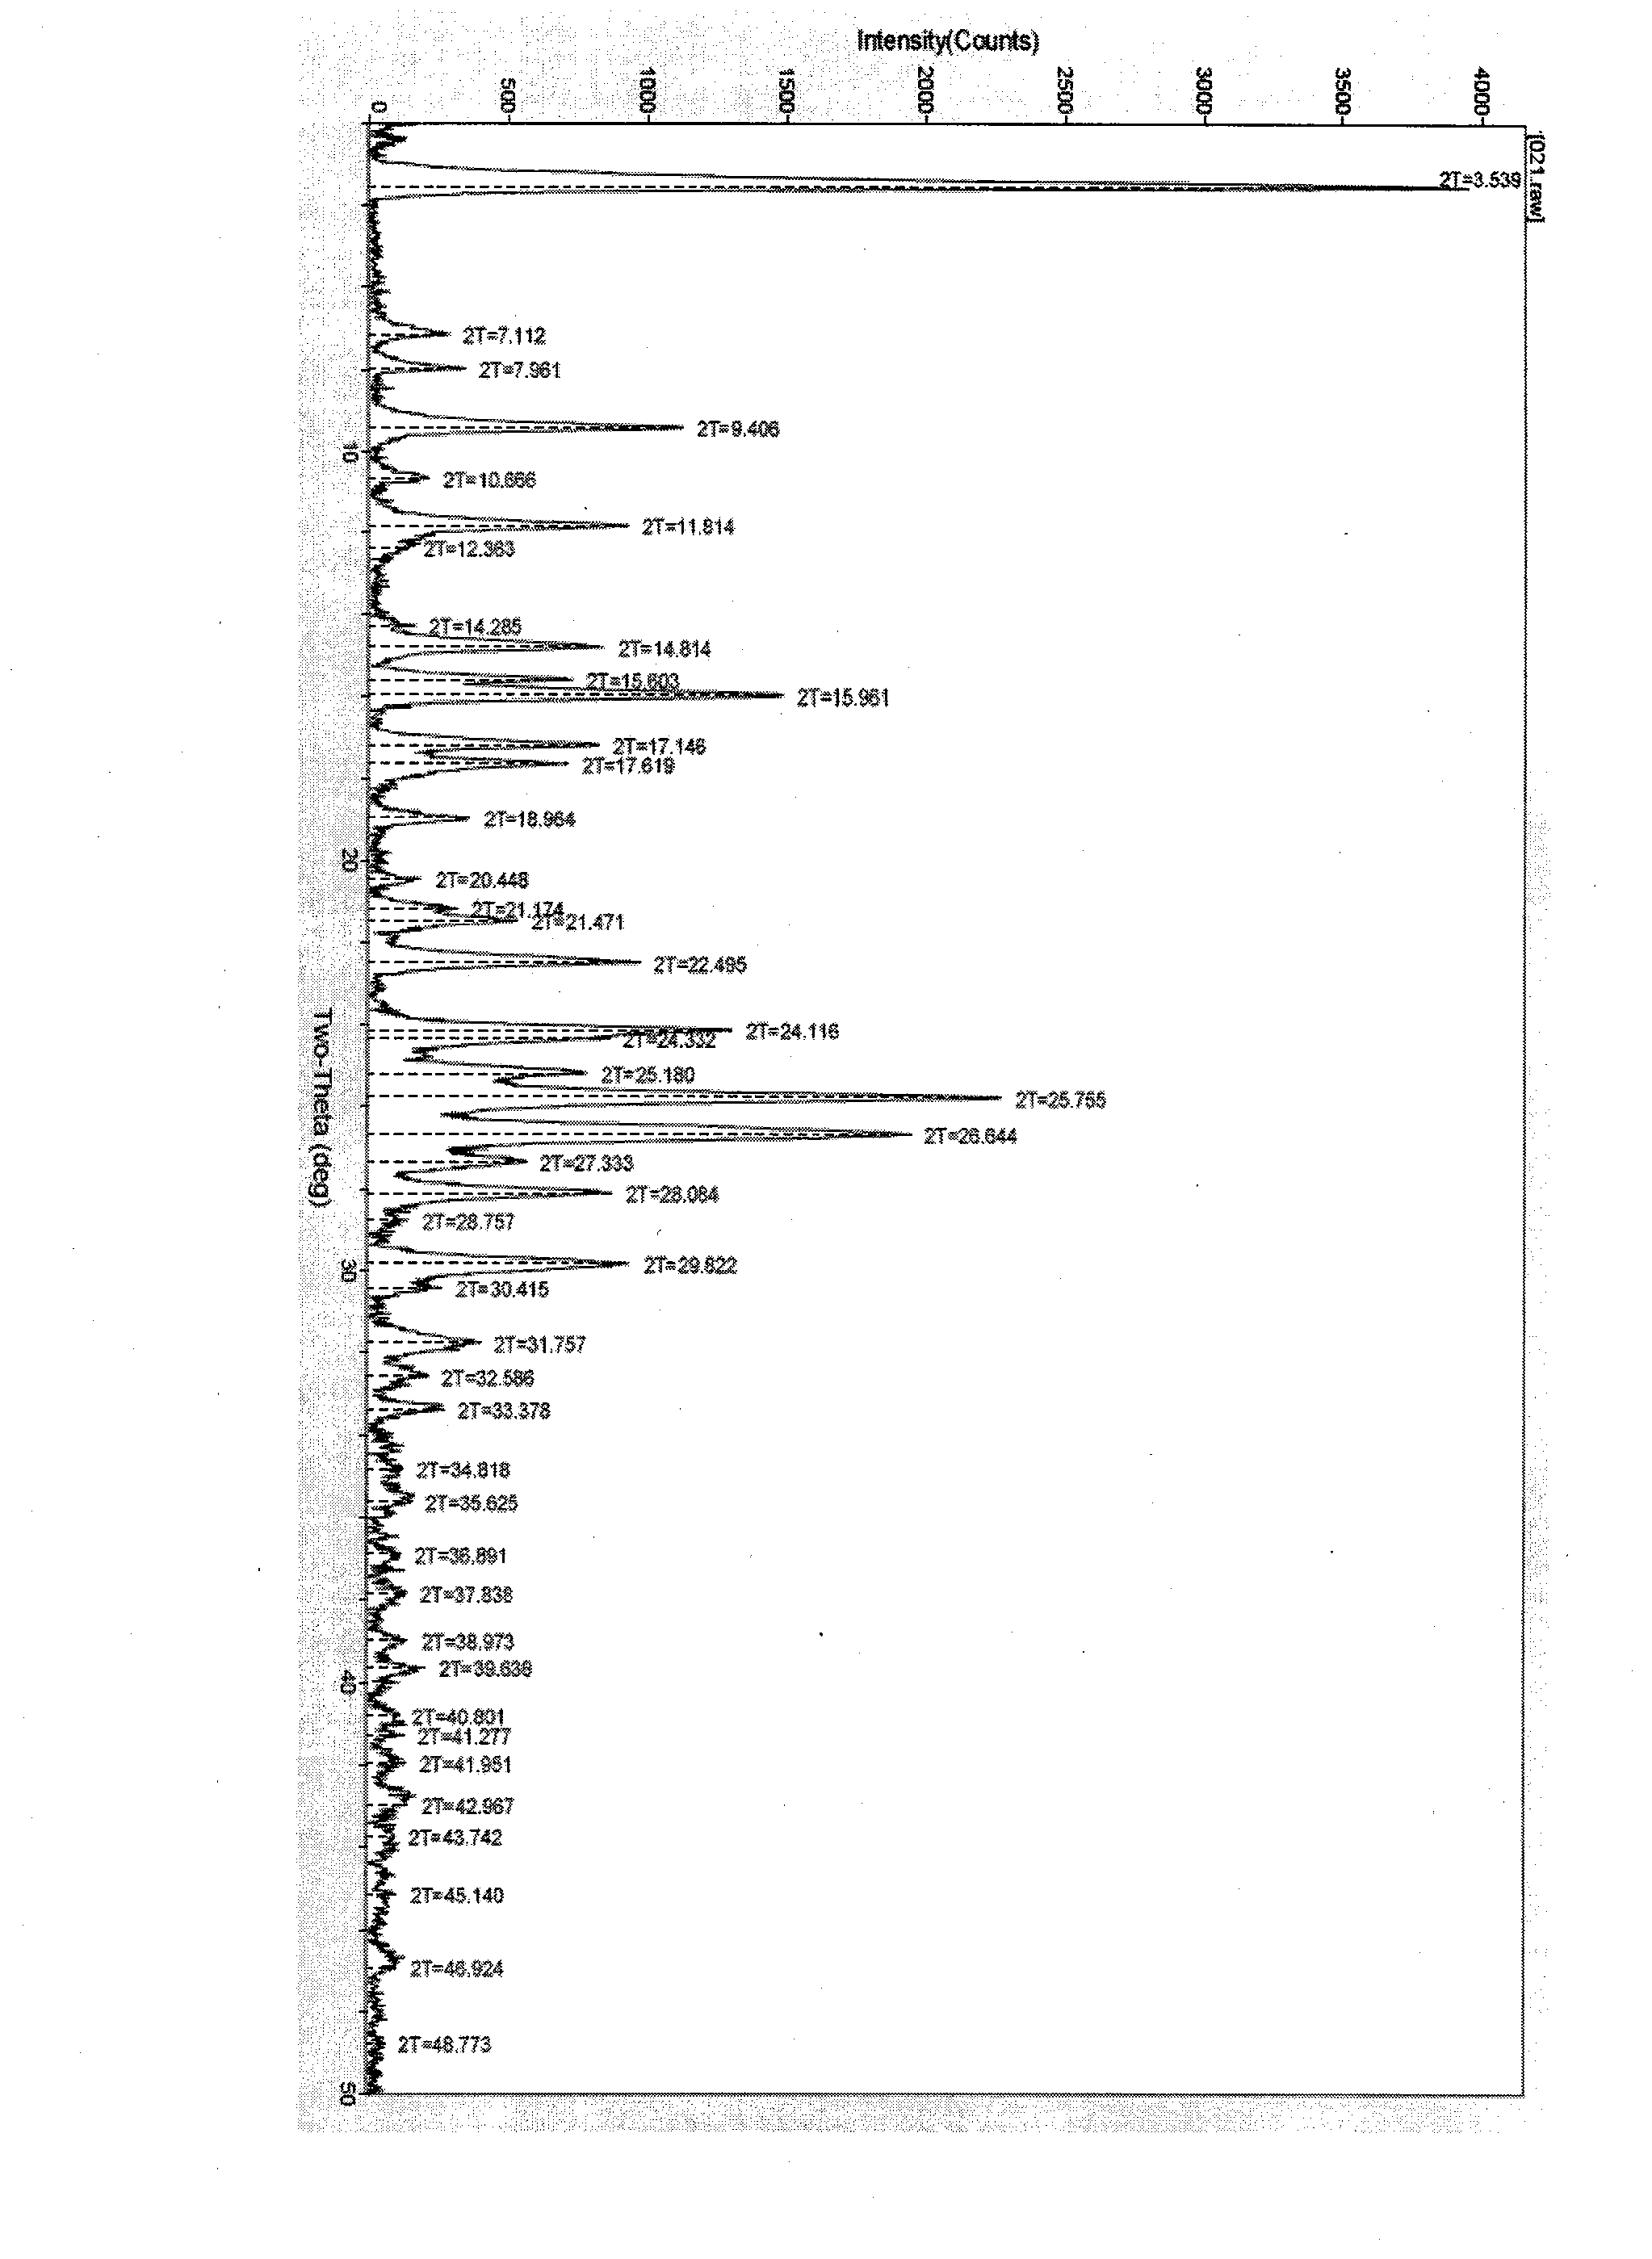 Polymorphic substance of valganciclovir hydrochloride and medical composition thereof